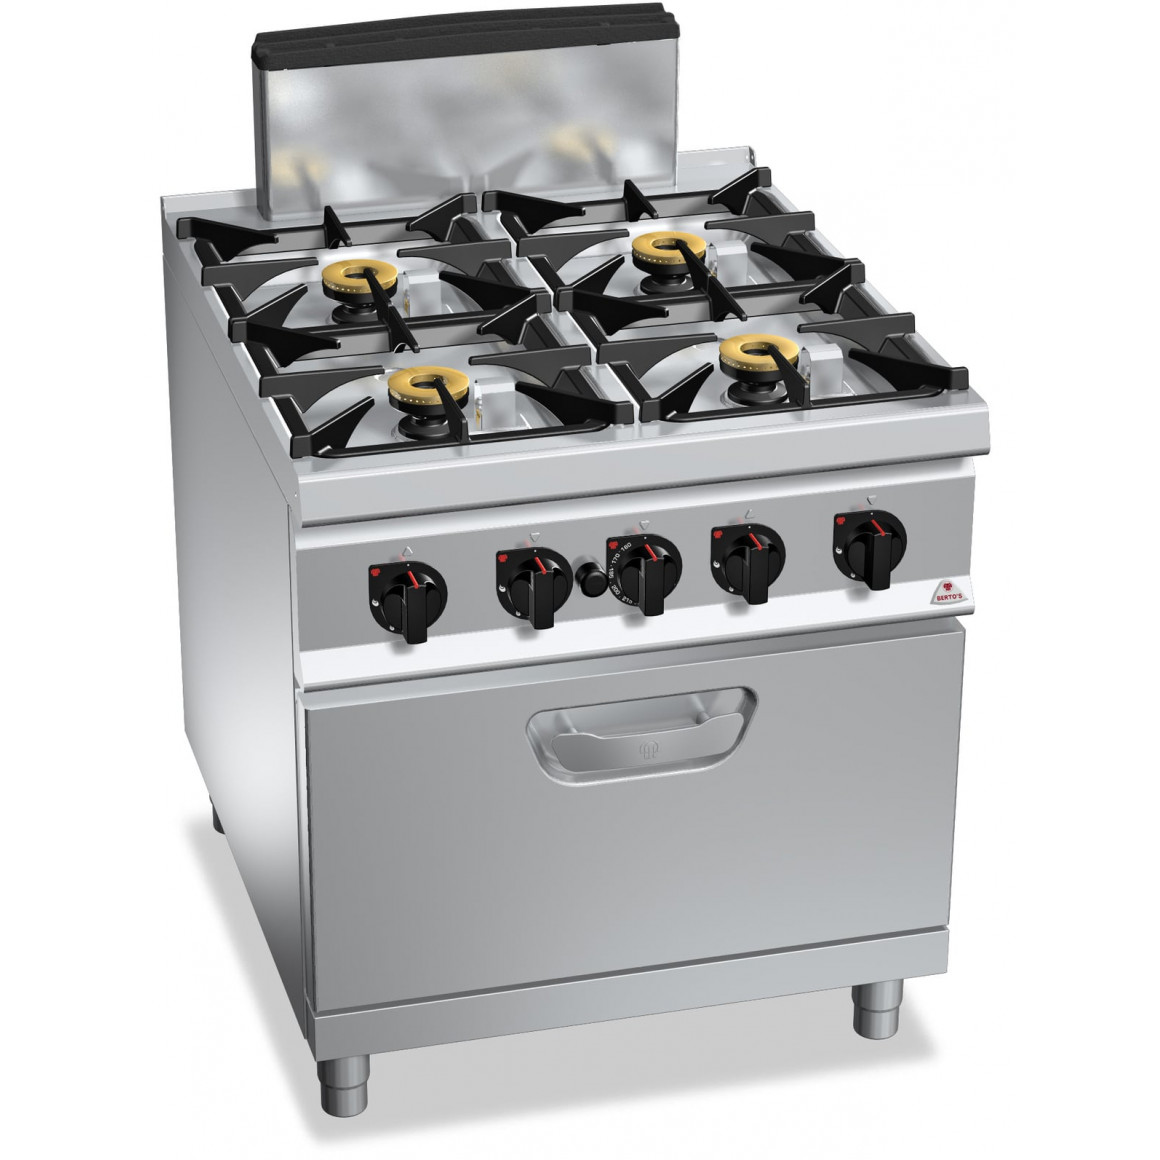 Gas cooker 4 plate SG9F4PS+FG